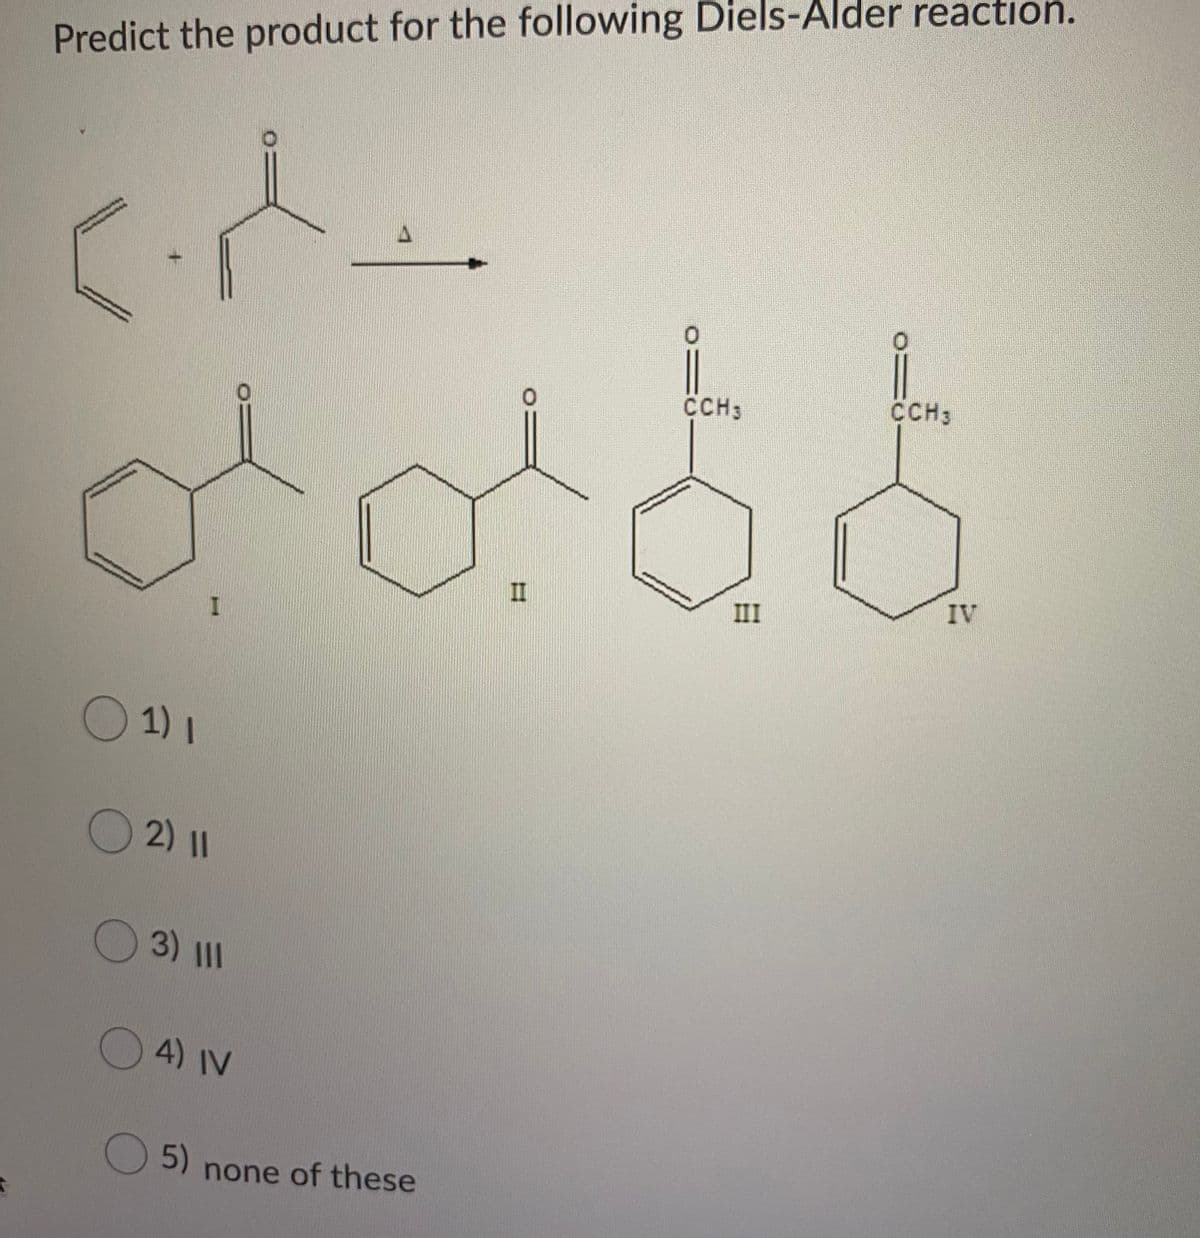 Predict the product for the following Diels-Alder reaction.
CCH3
CCH3
IV
III
1) 1
2) I1
3) 1II
4) IV
5)
none of these
